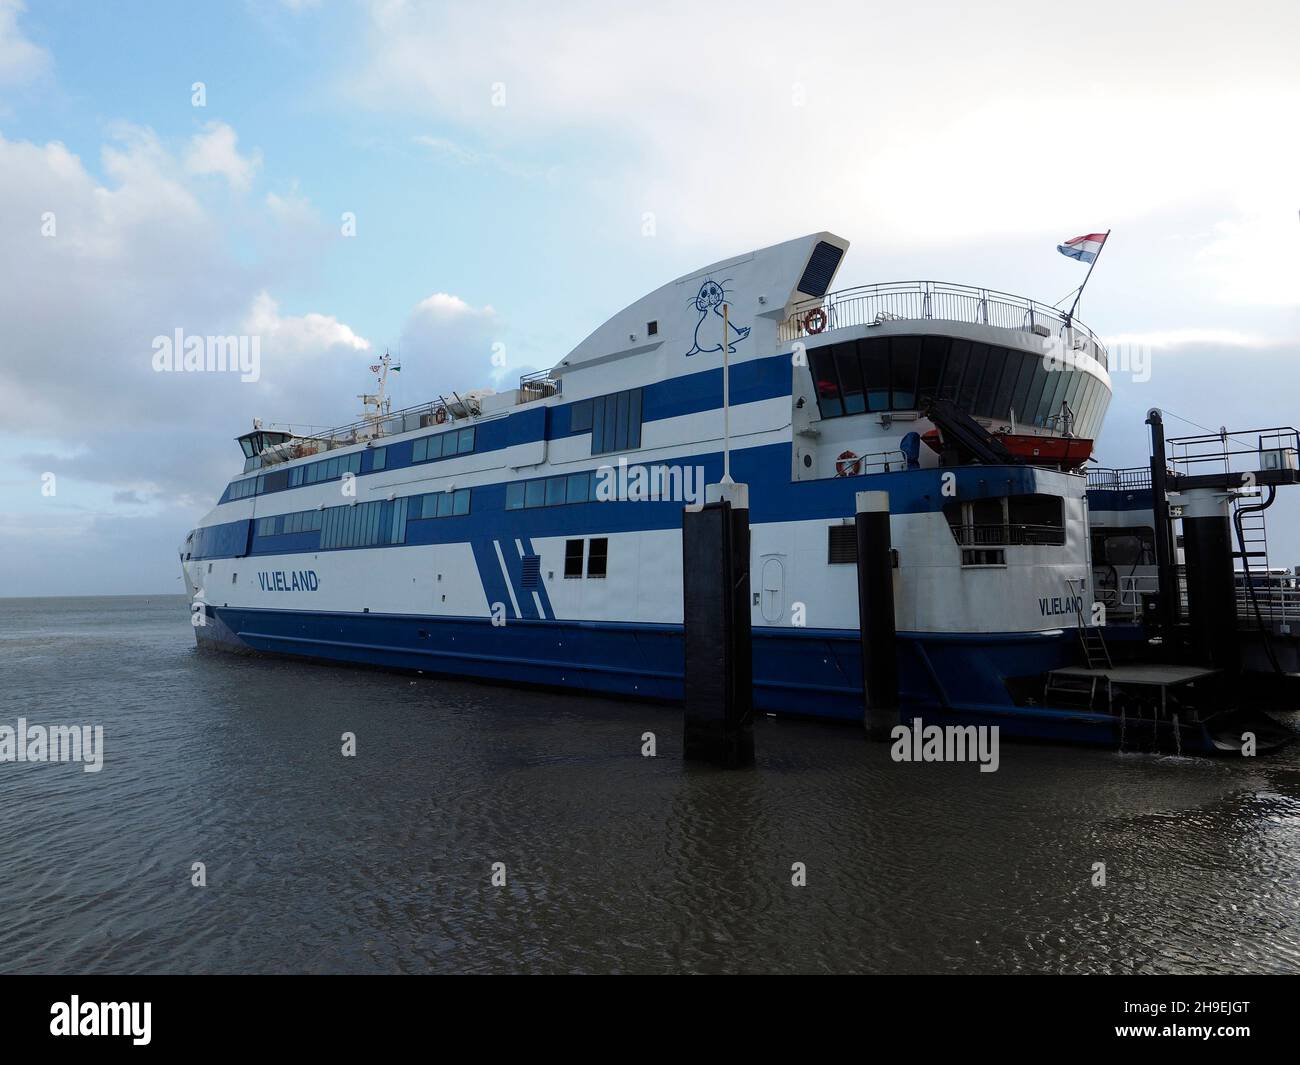 The Ferry from Vlieland island to Harlingen, Friesland, the Netherlands. The trip over the shallow Wadden sea takes about 90 minutes. Stock Photo